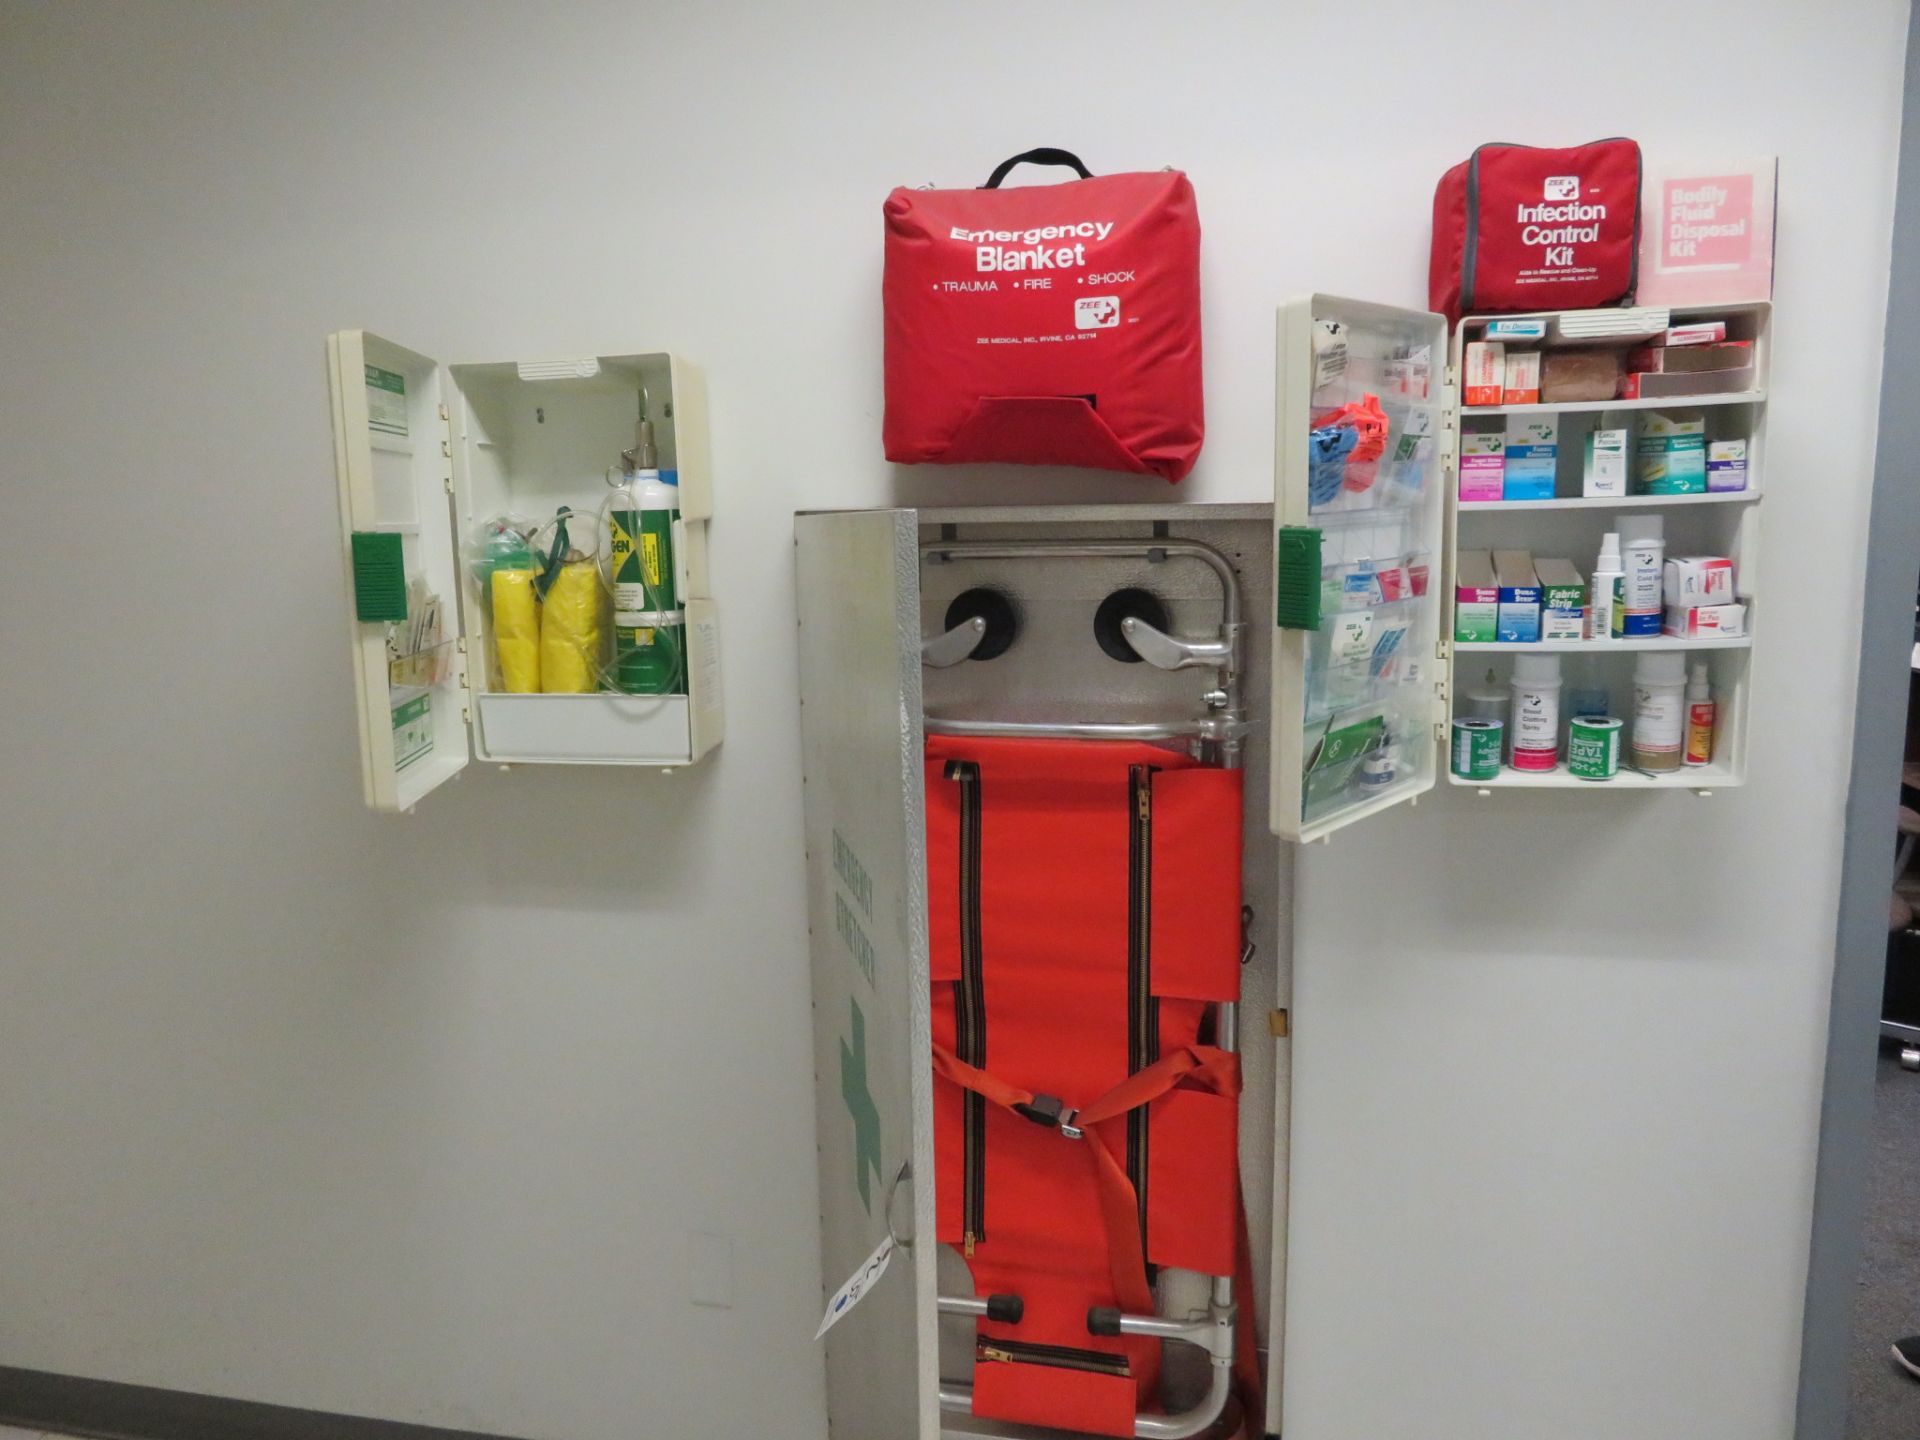 [LOT] First Aid Emergency Blanket, Zee Oxygen Unit, Infection Control Kit, And Stretcher